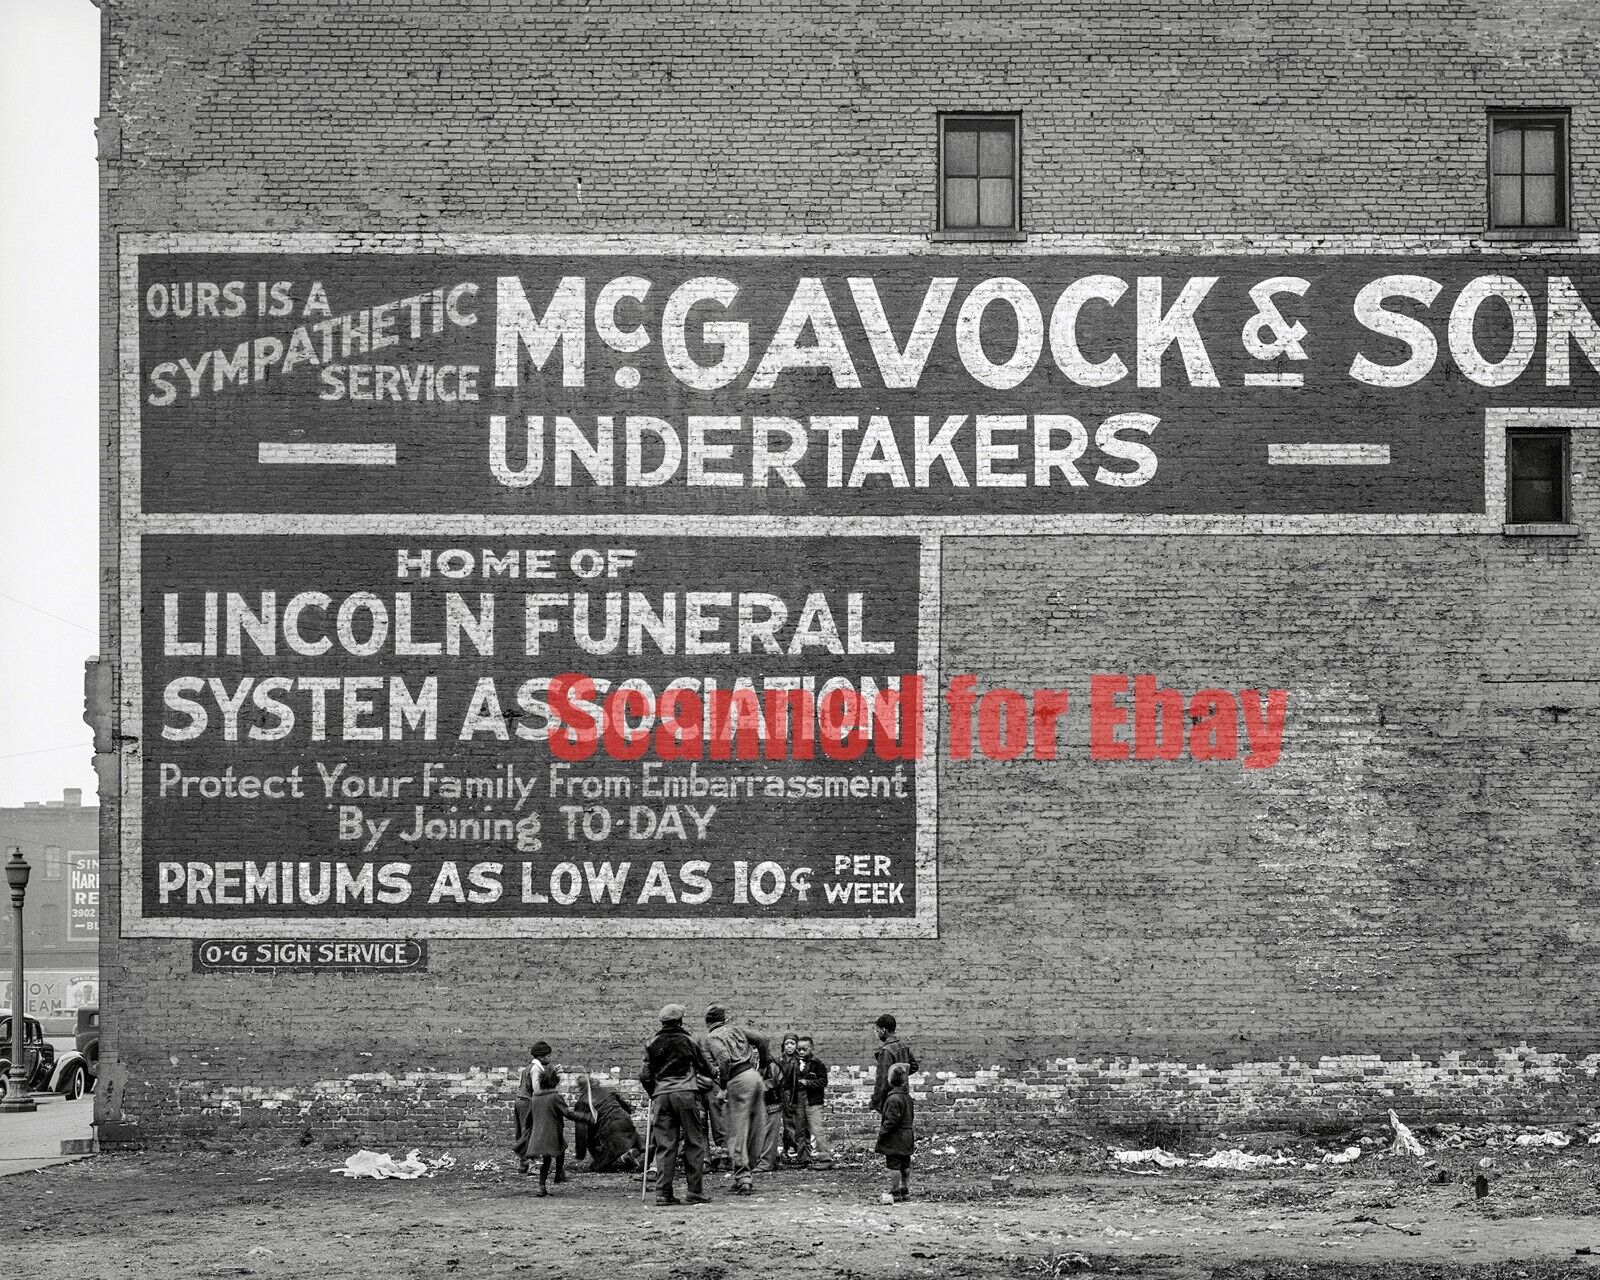 Circa 1941 Sign In Chicago McGavock Undertakers 8x10 Photo 